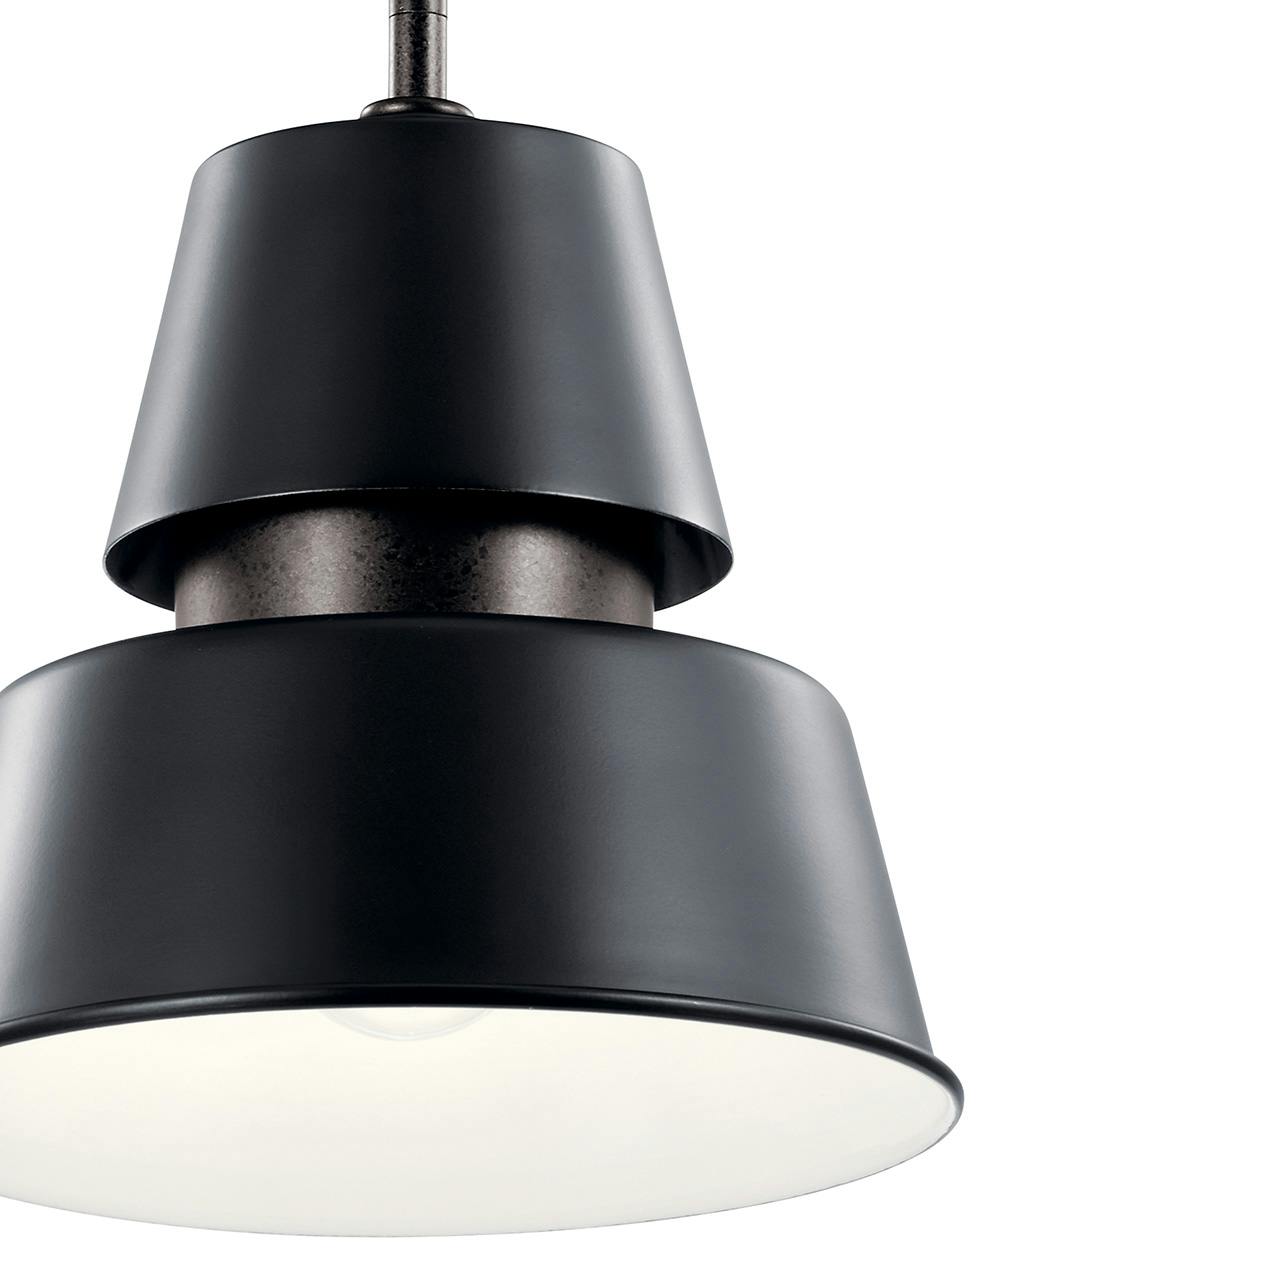 Close up view of the Lozano 9.5" 1 Light Pendant Black on a white background